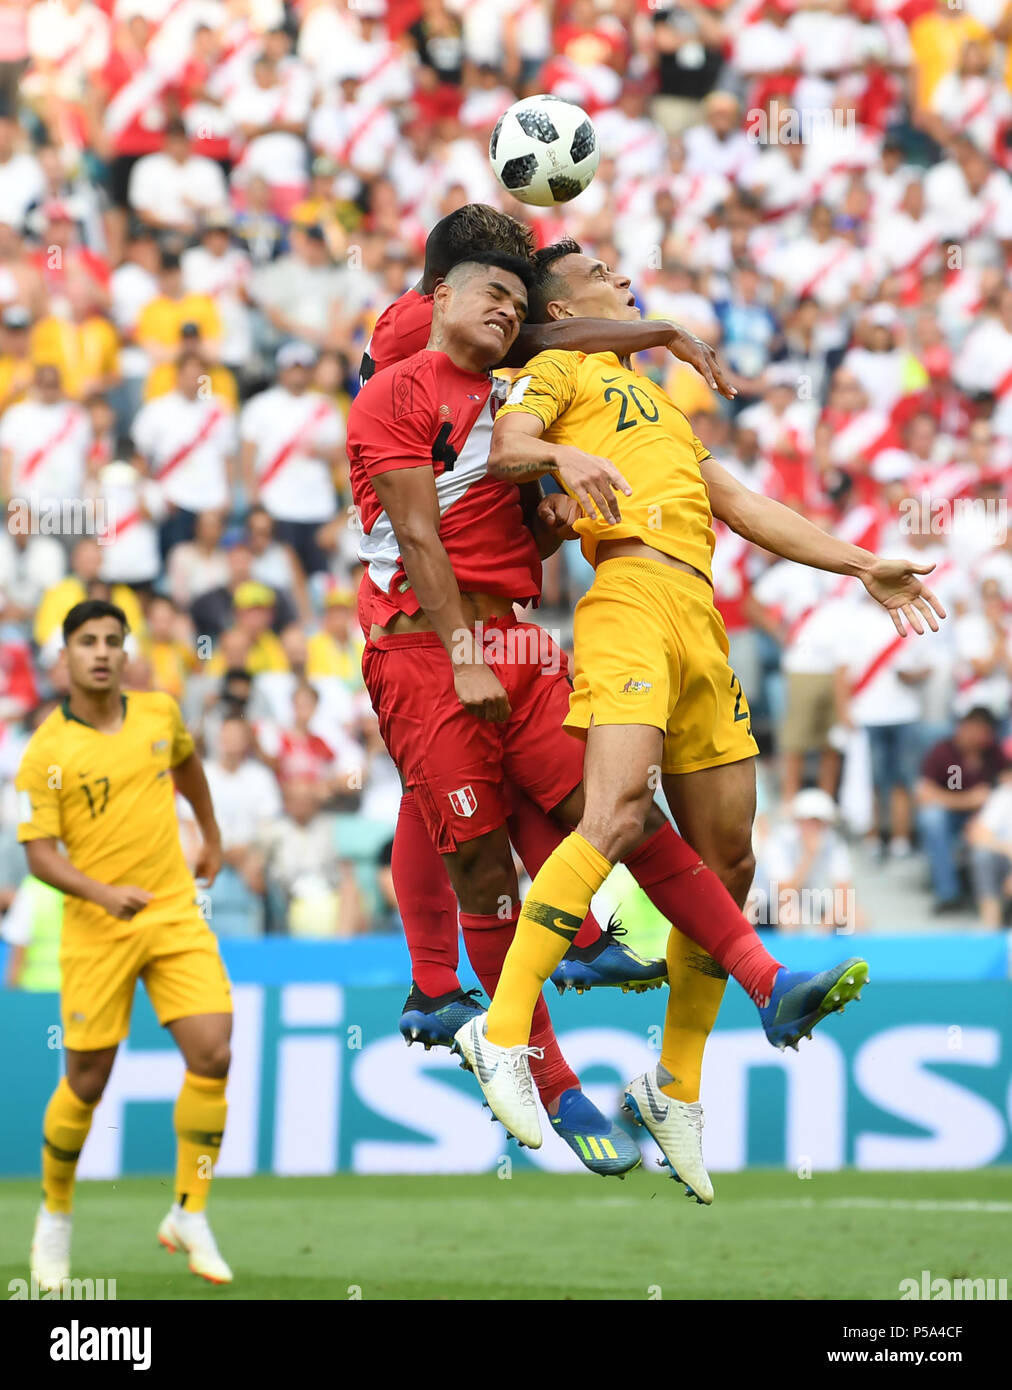 Sochi, Russia. 26th June, 2018. Trent Sainsbury (R) of Australia vies with Anderson Santamaria (C) of Peru during the 2018 FIFA World Cup Group C match between Australia and Peru in Sochi, Russia, June 26, 2018. Credit: Chen Cheng/Xinhua/Alamy Live News Stock Photo